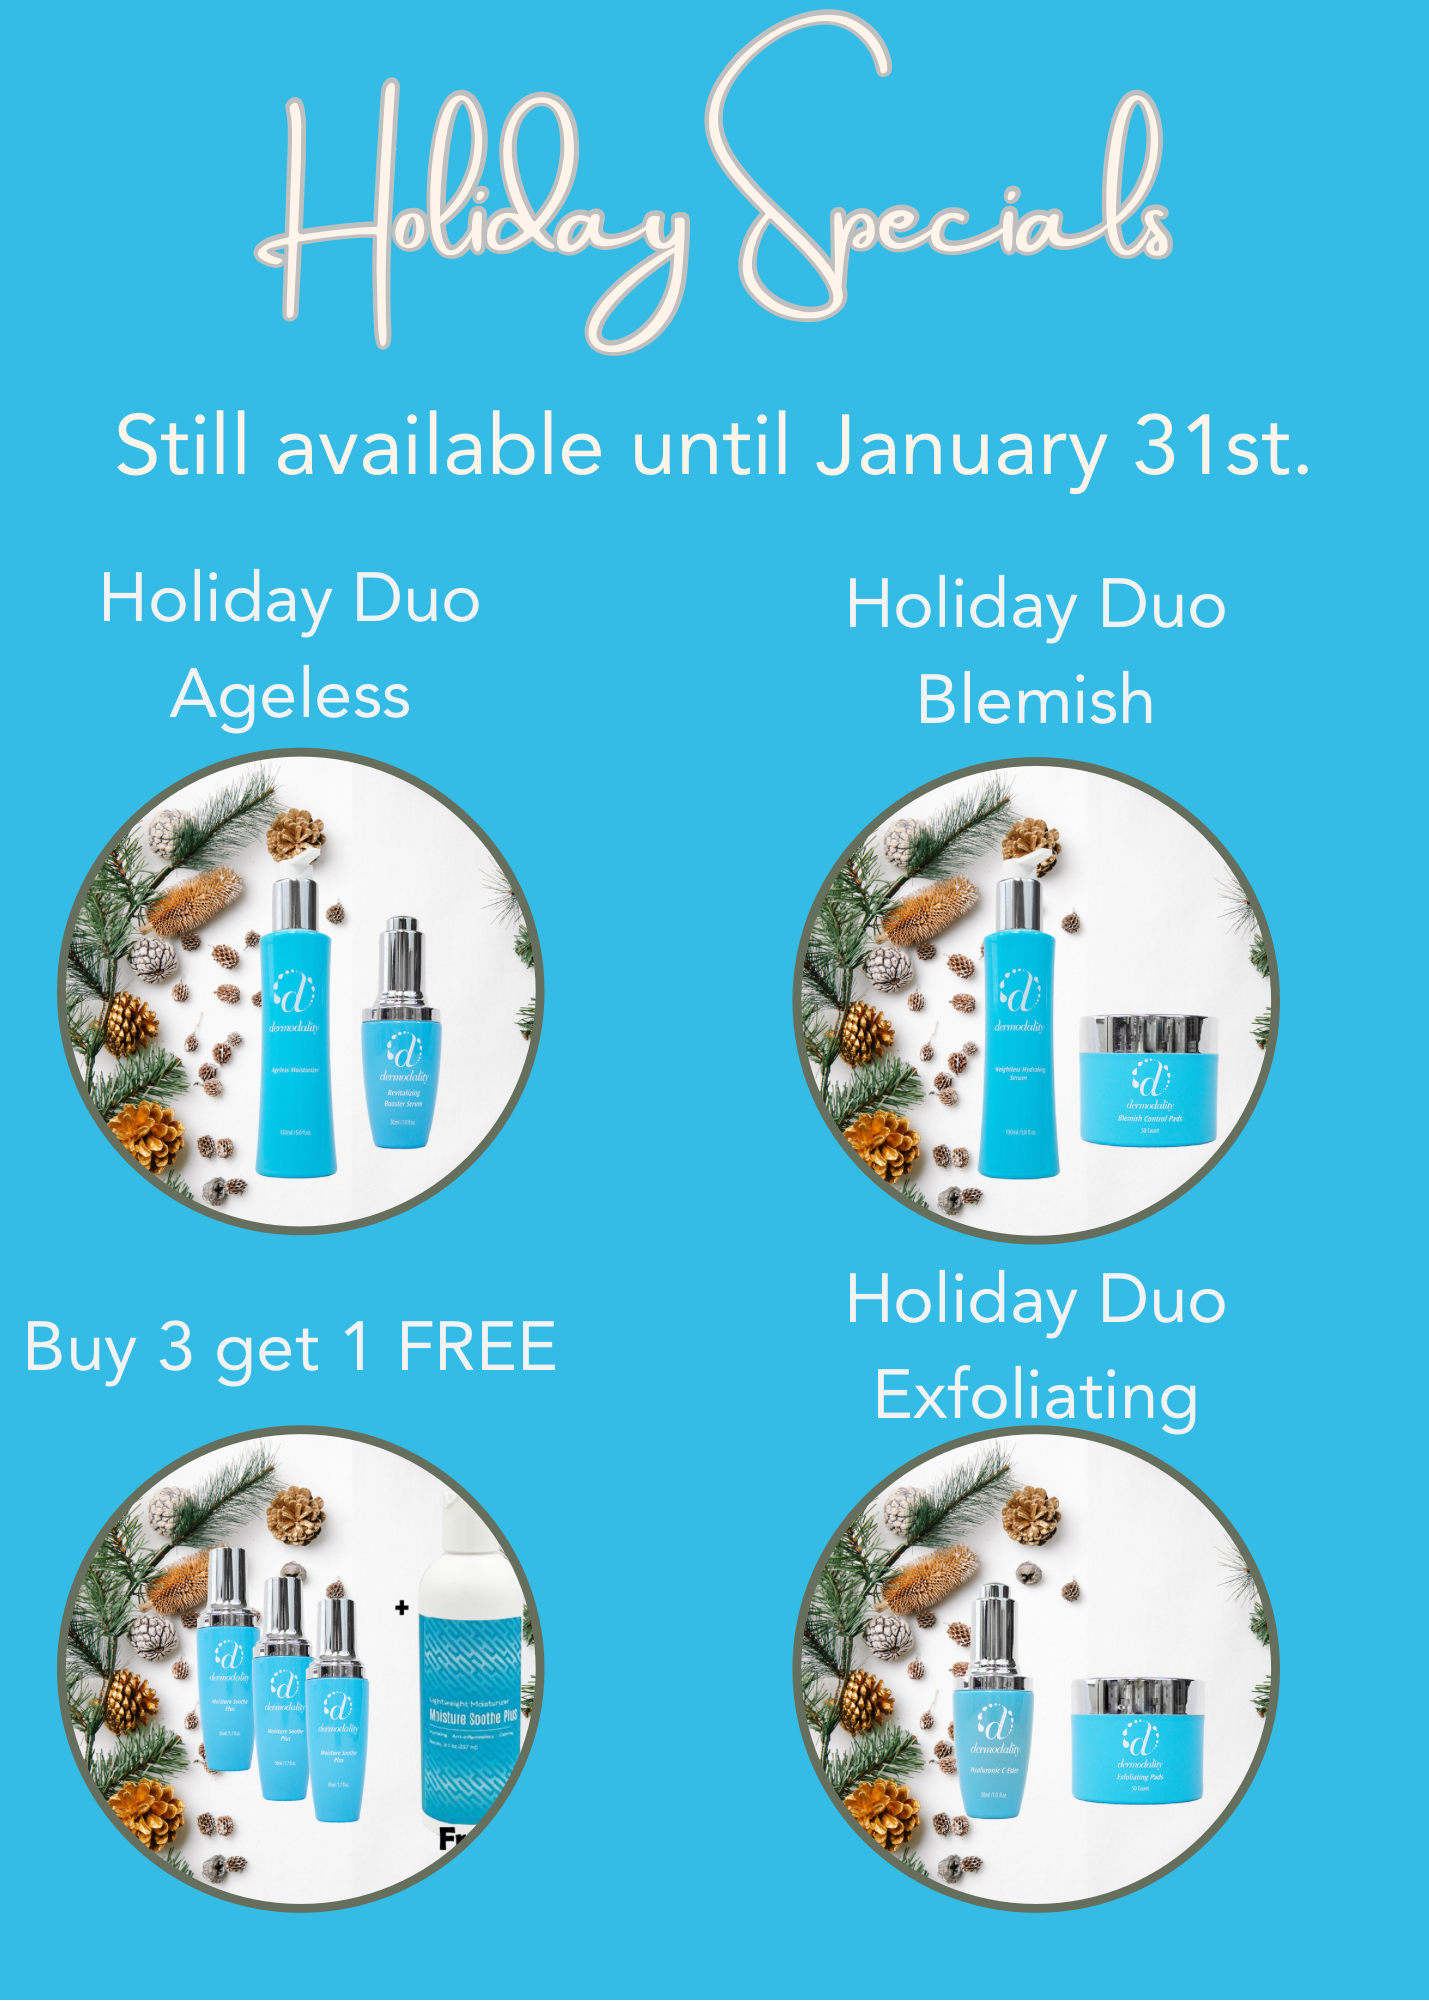 Dermodality Skin Solutions - Holiday Specials